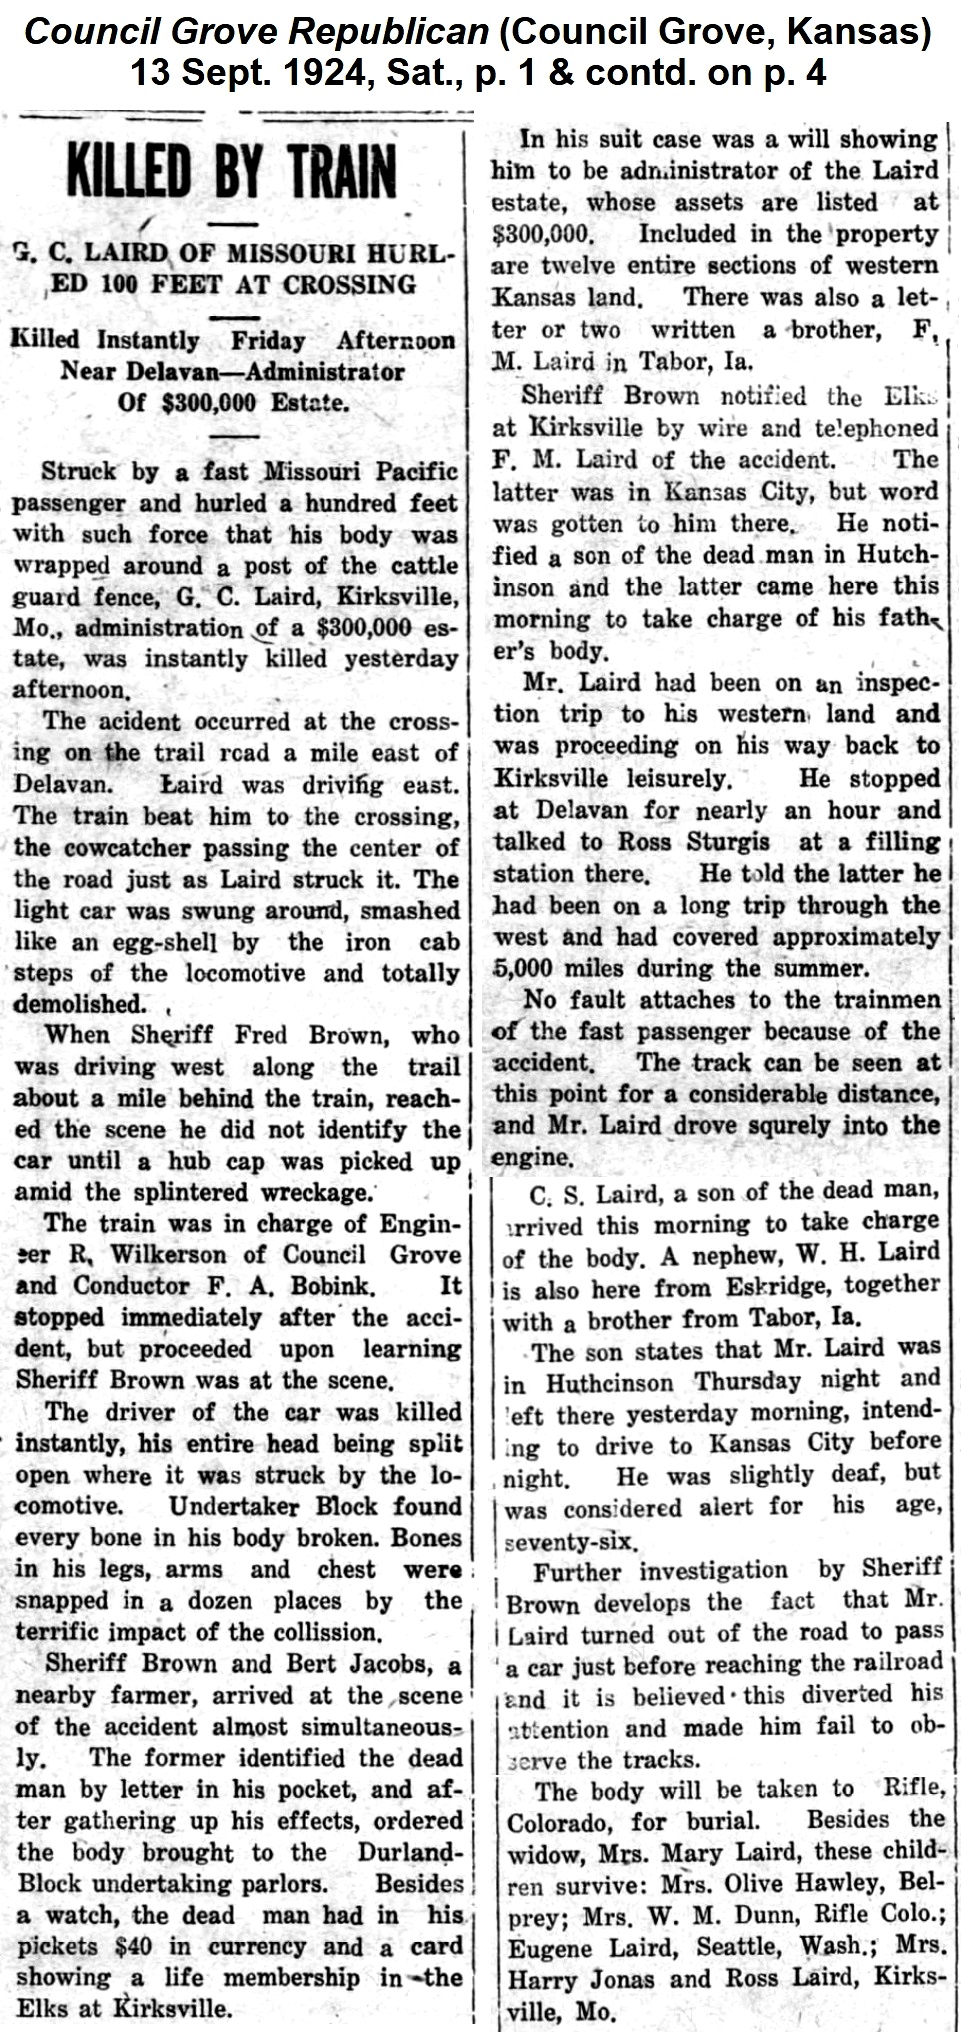 Clippping from The Council Grove (Kansas)
               Republican, dated 13 September 1924, describing the accident that killed George.